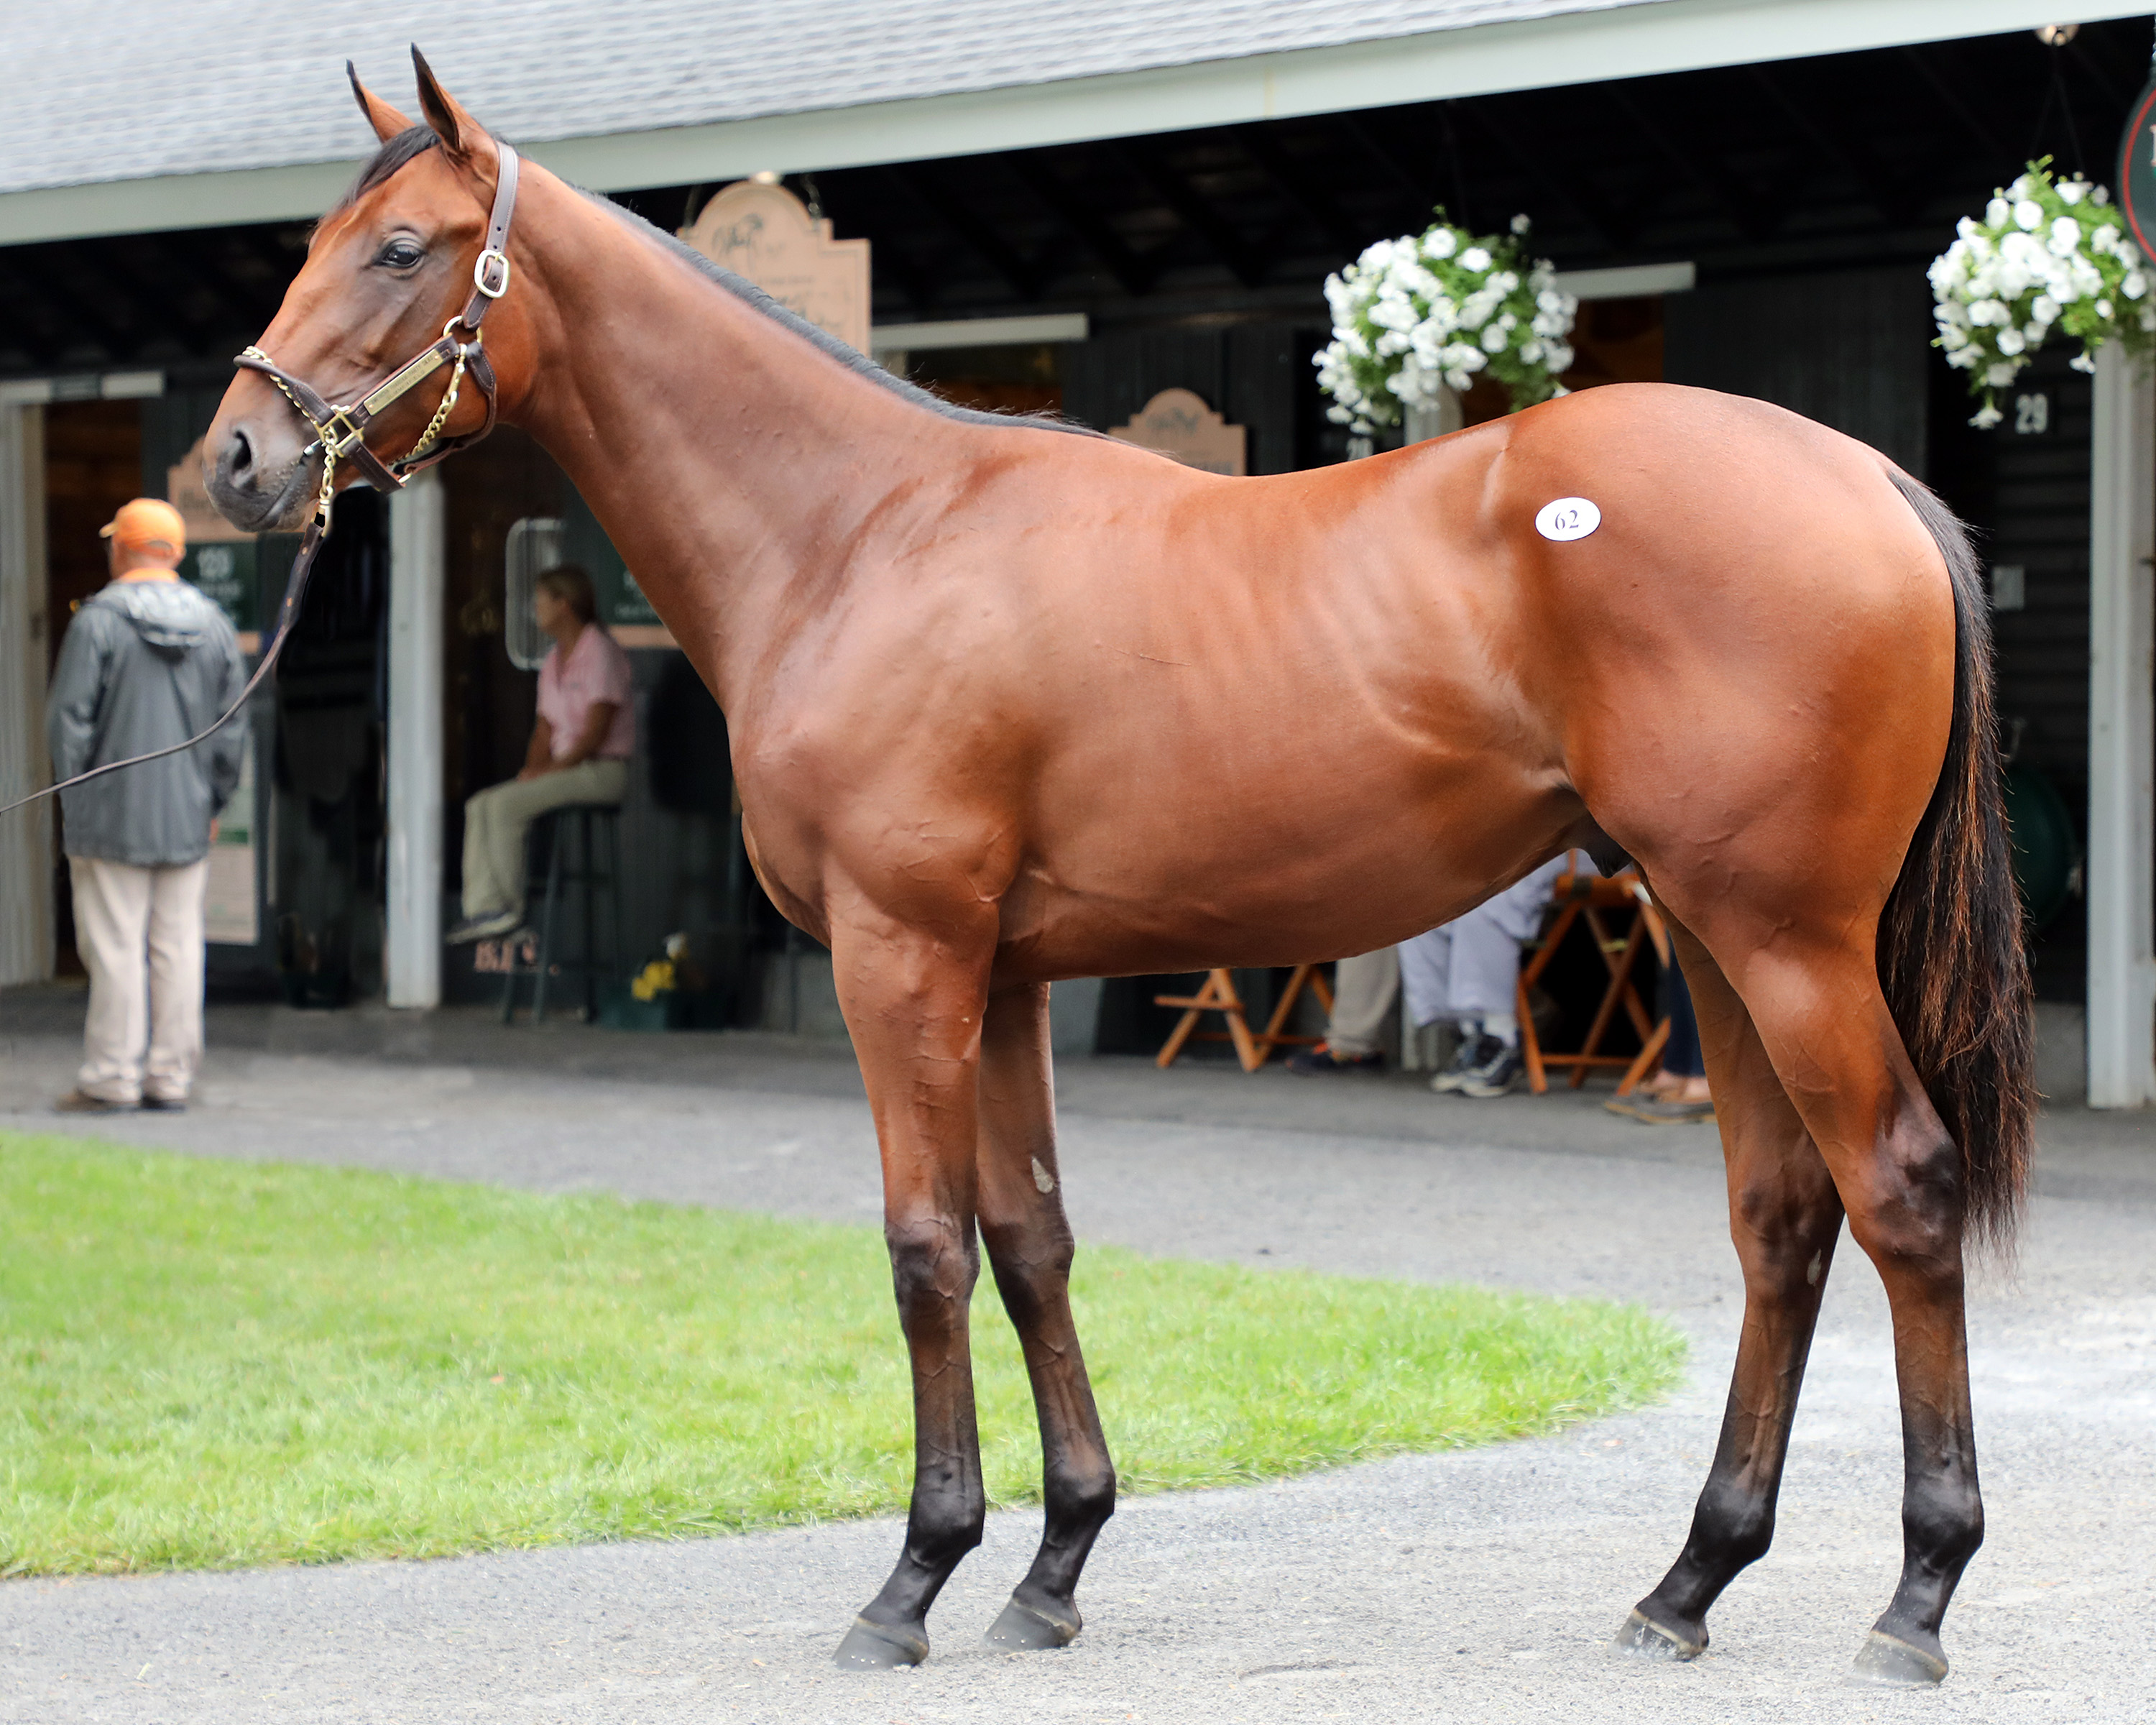 Bob Baffert signed for $1 million on behalf of M.V. Magnier for this colt out of Party Silks at the Fasig-Tipton Saratoga sale in August. Photo: Fasig-Tipton